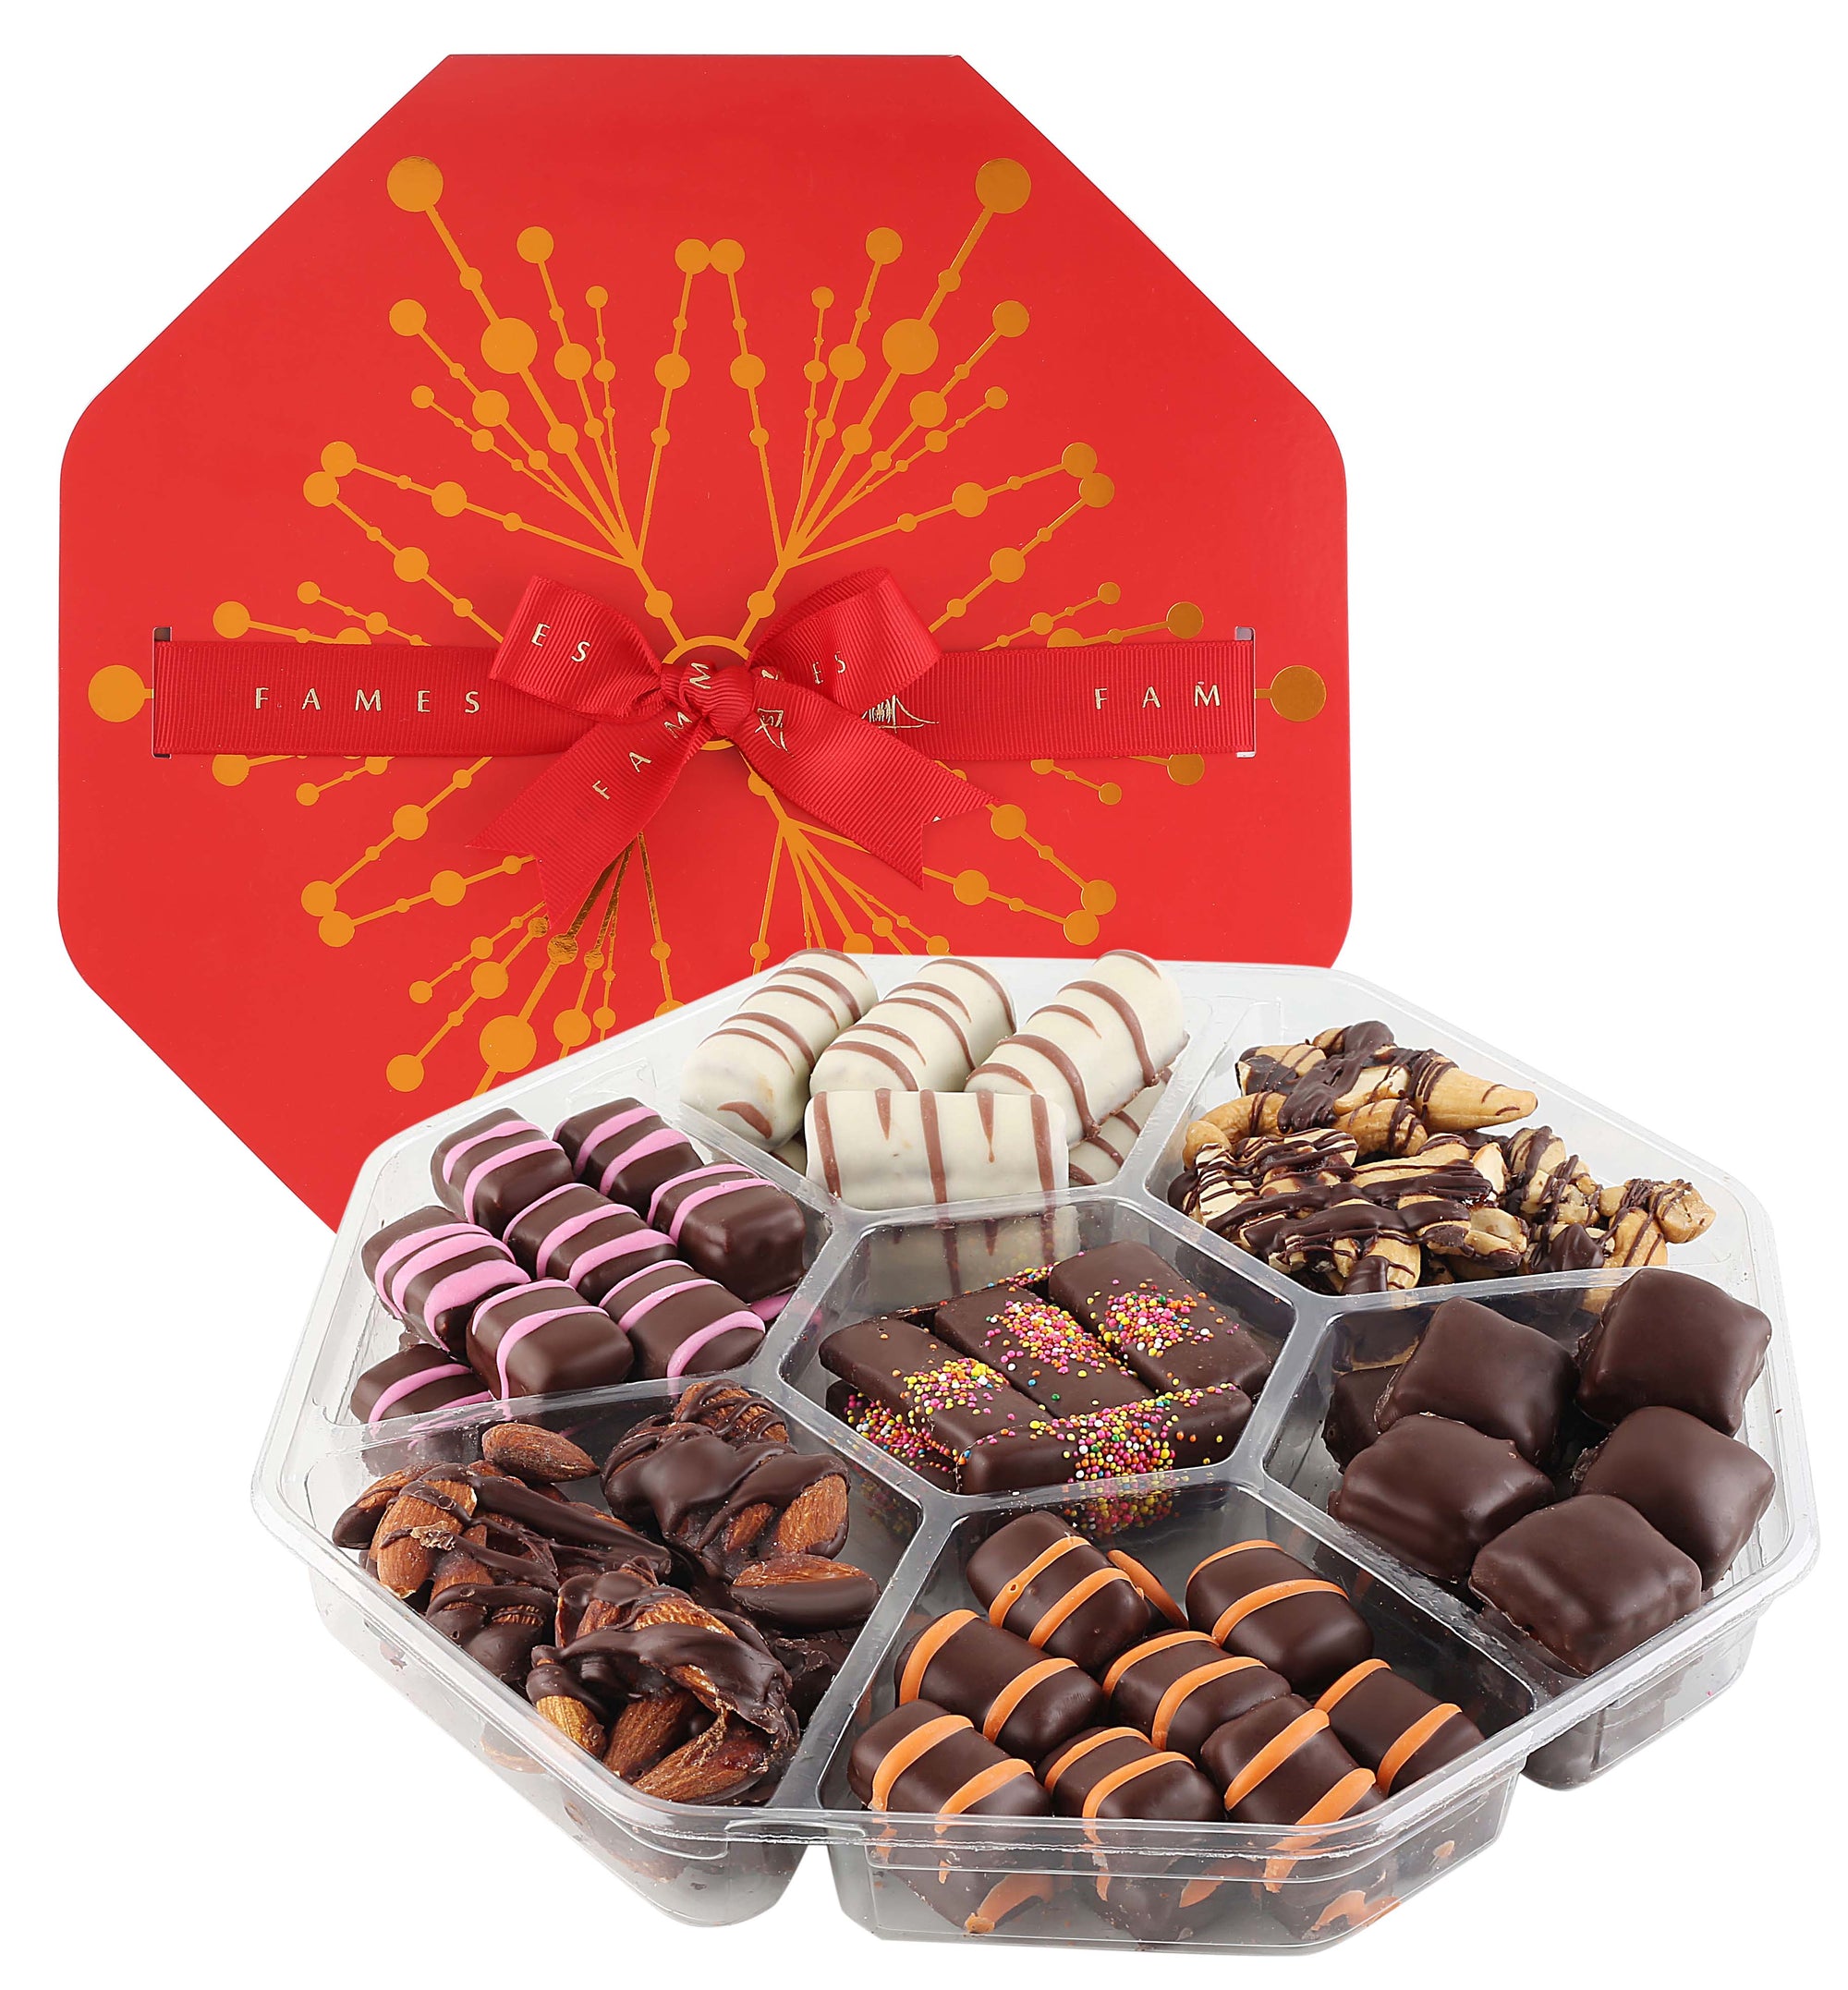 Gourmet Chocolate Gift, Handcrafted Deluxe Chocolates, Kosher, Dairy Free.  Fames Chocolate   